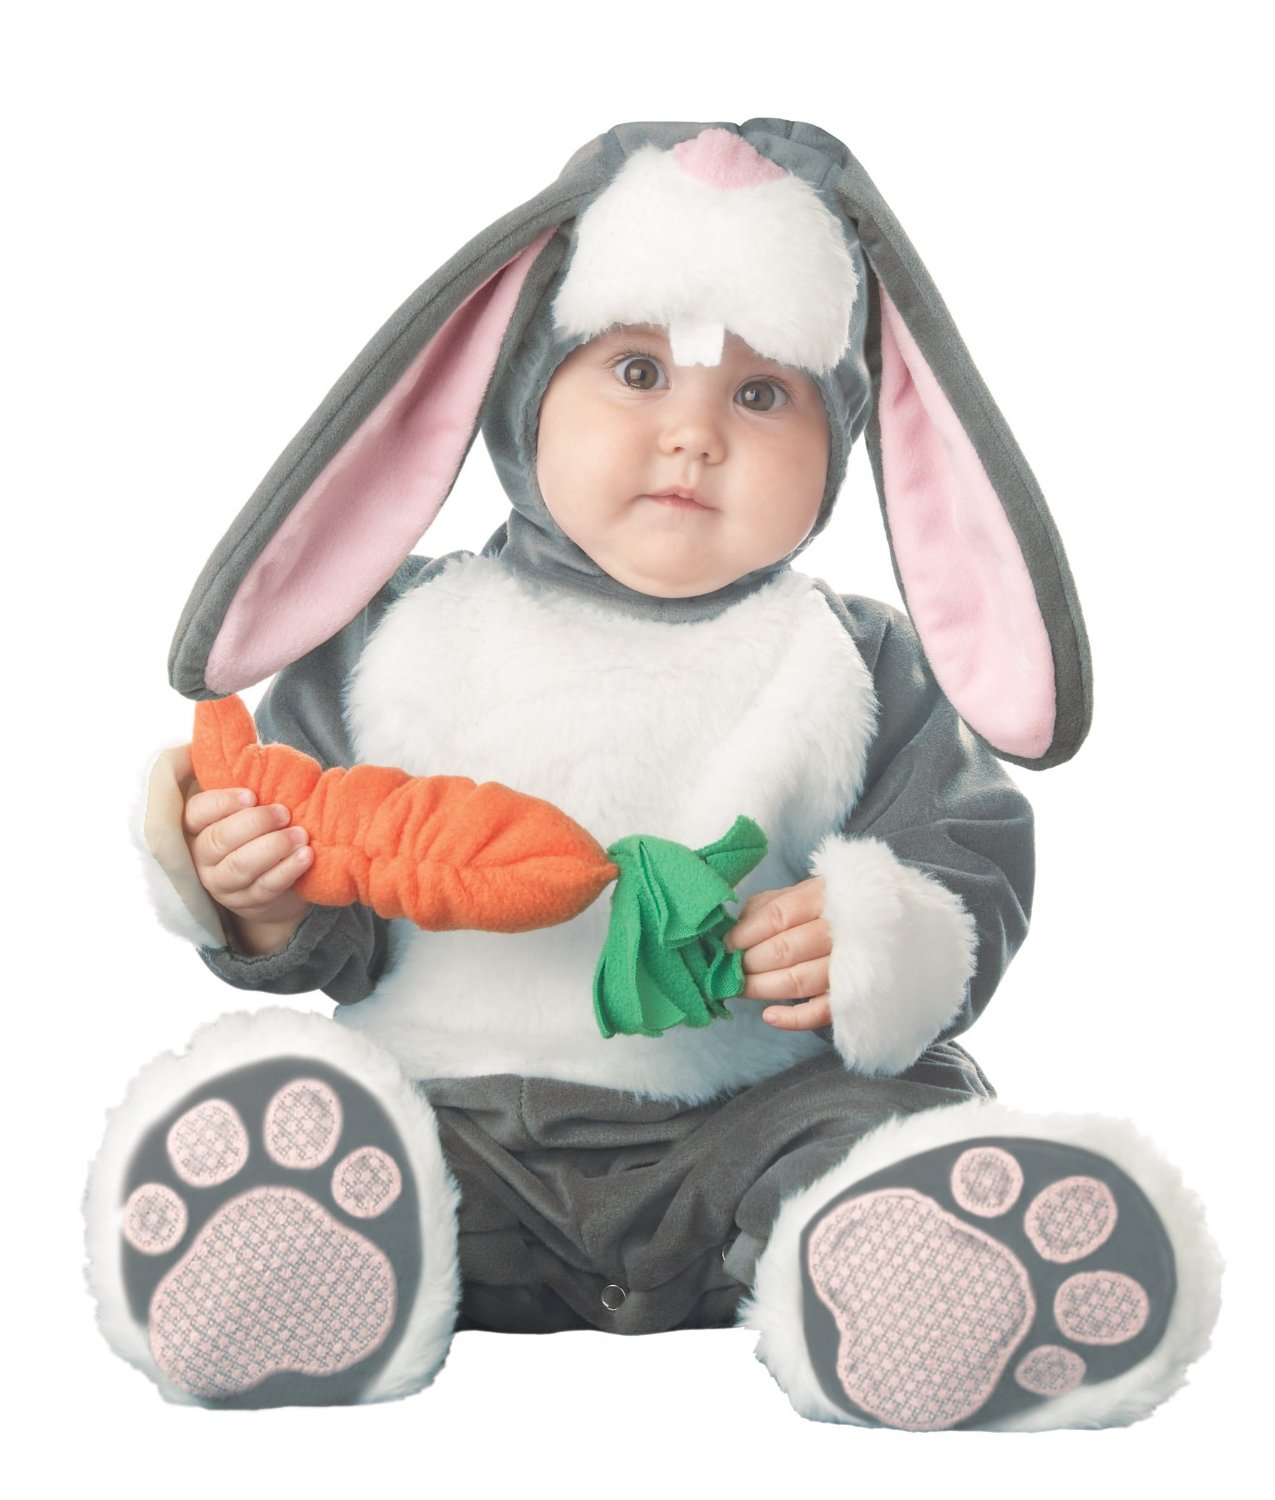 Shopping Alert: Lil Characters Infant Bunny Costume – Almost Sold Out!